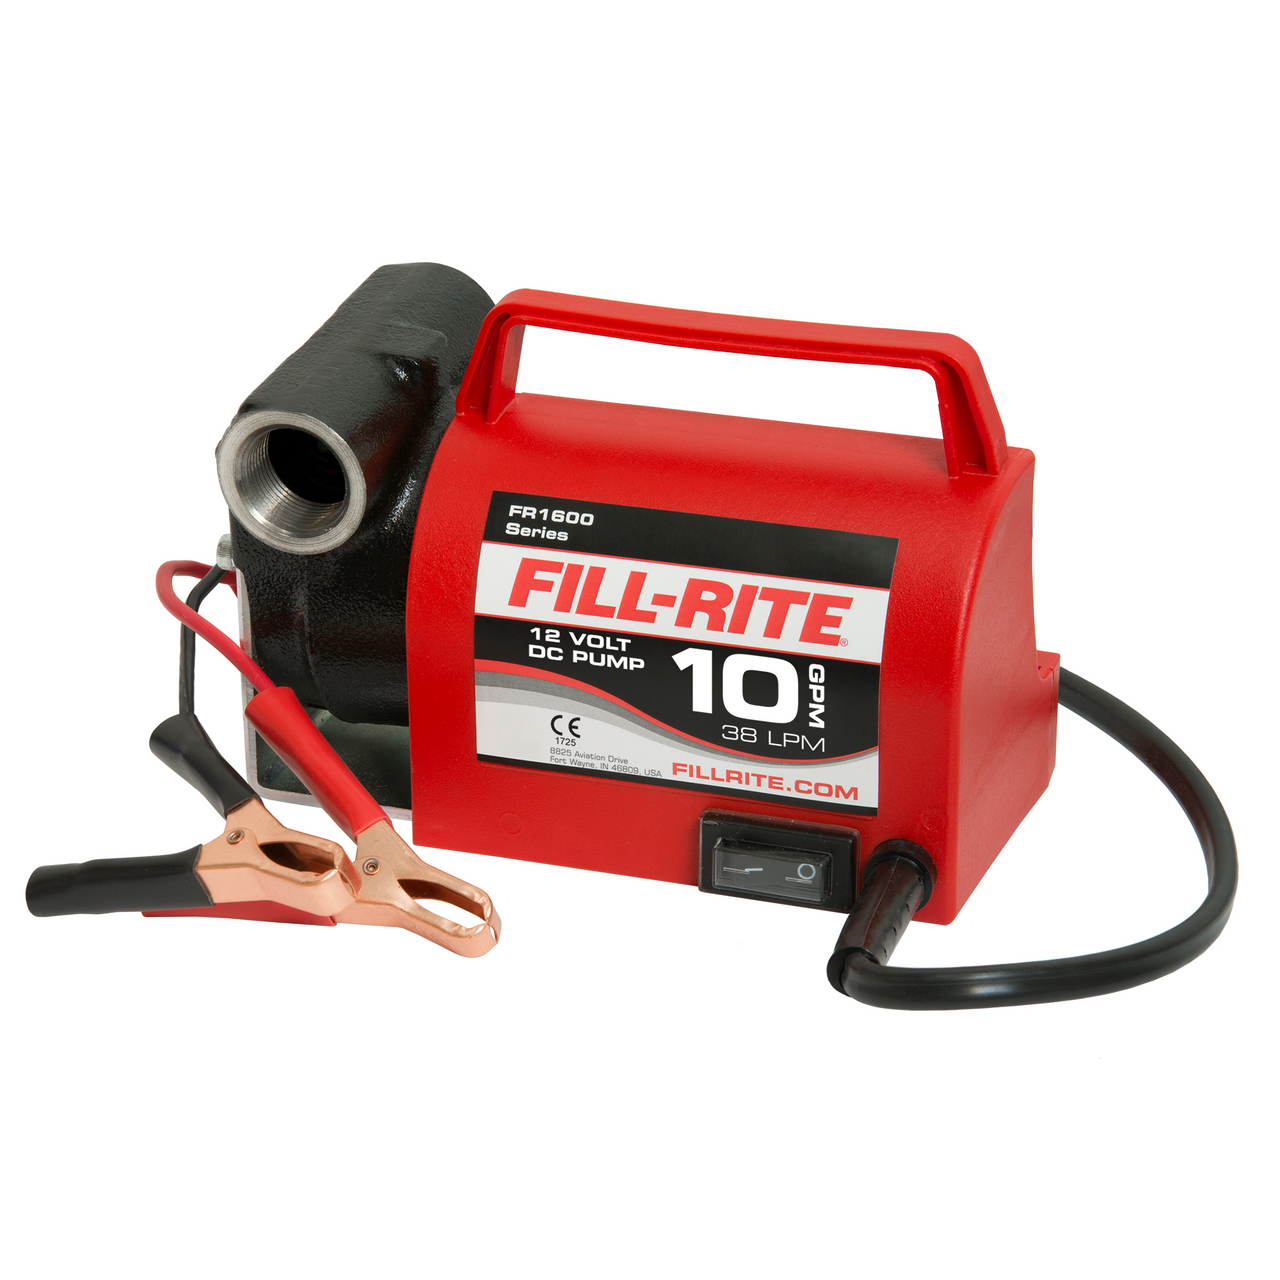 Fill-Rite FR1614 12V 10 GPM Portable Fuel Transfer Pump for Diesel and  Antifreeze with Suction and Discharge Hoses